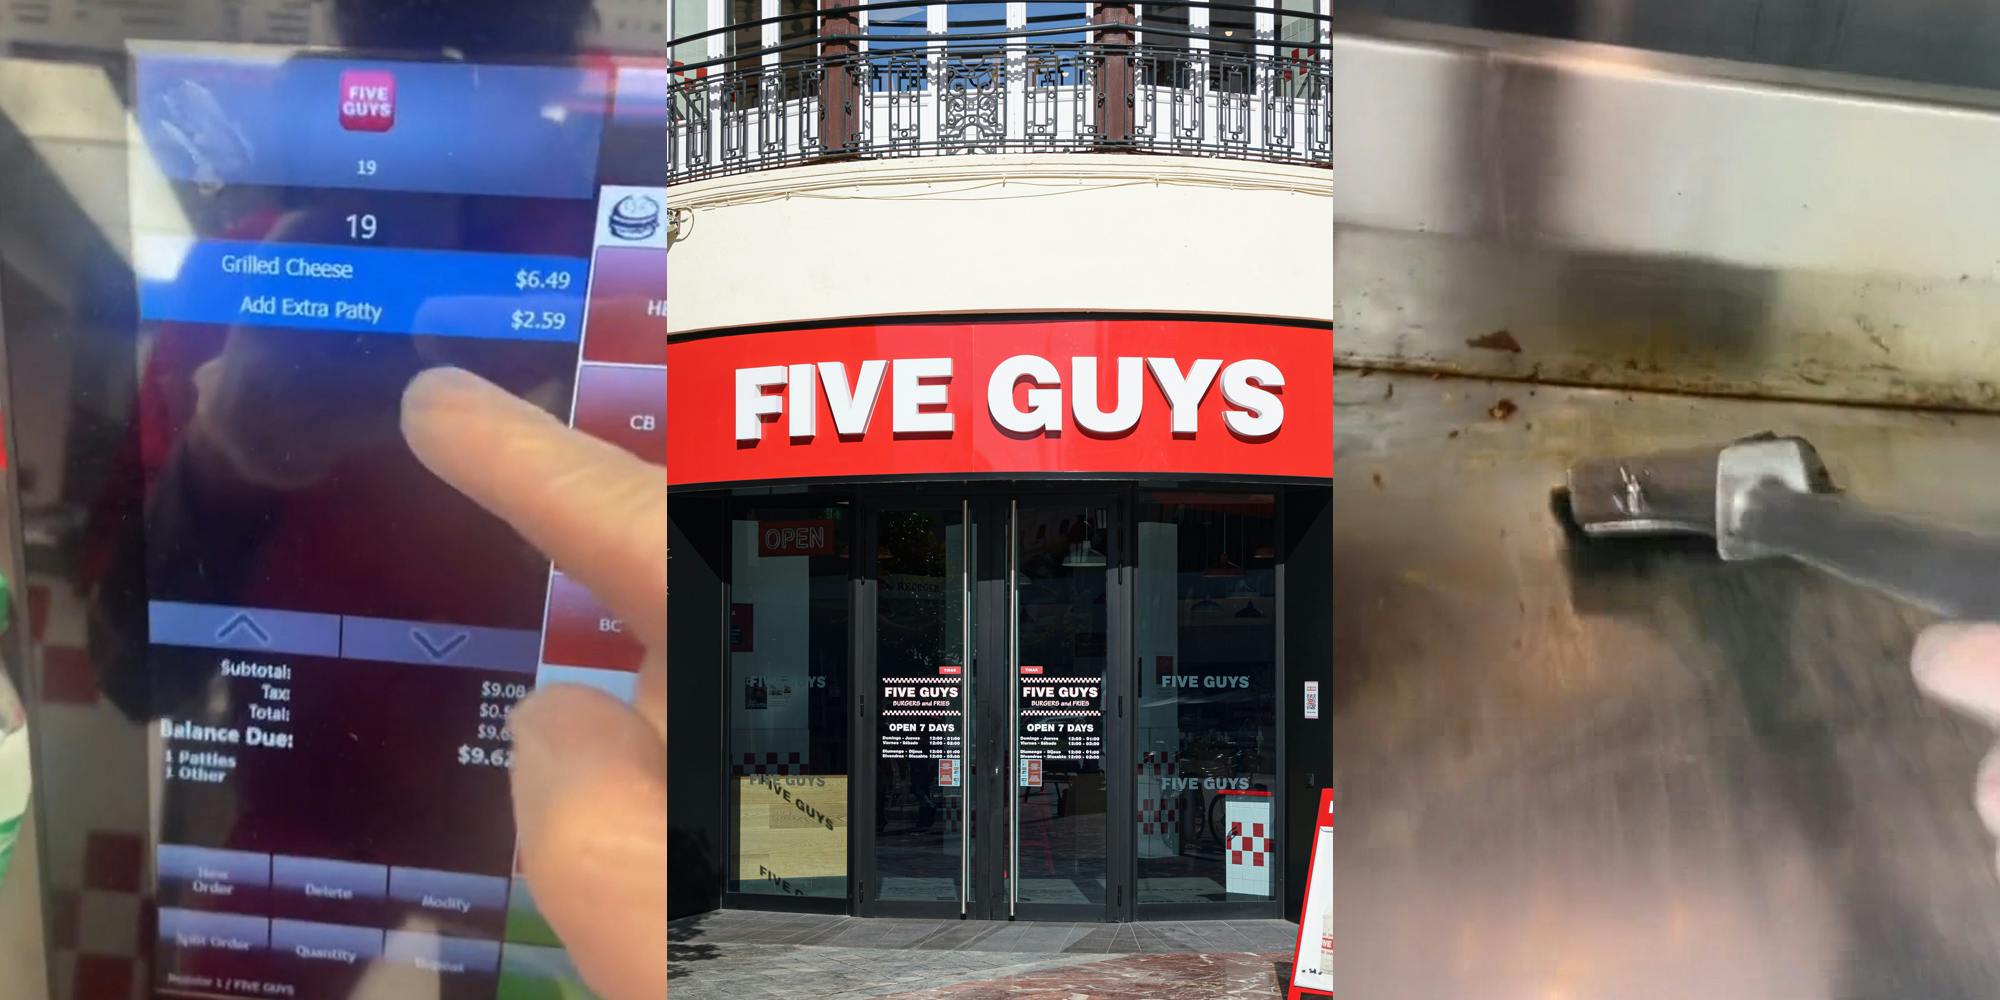 Five Guys employee pointing to order screen with "Grilled Cheese" (l) Five Guys sign on building (c) Five Guys employee scrapping grill clean (r)